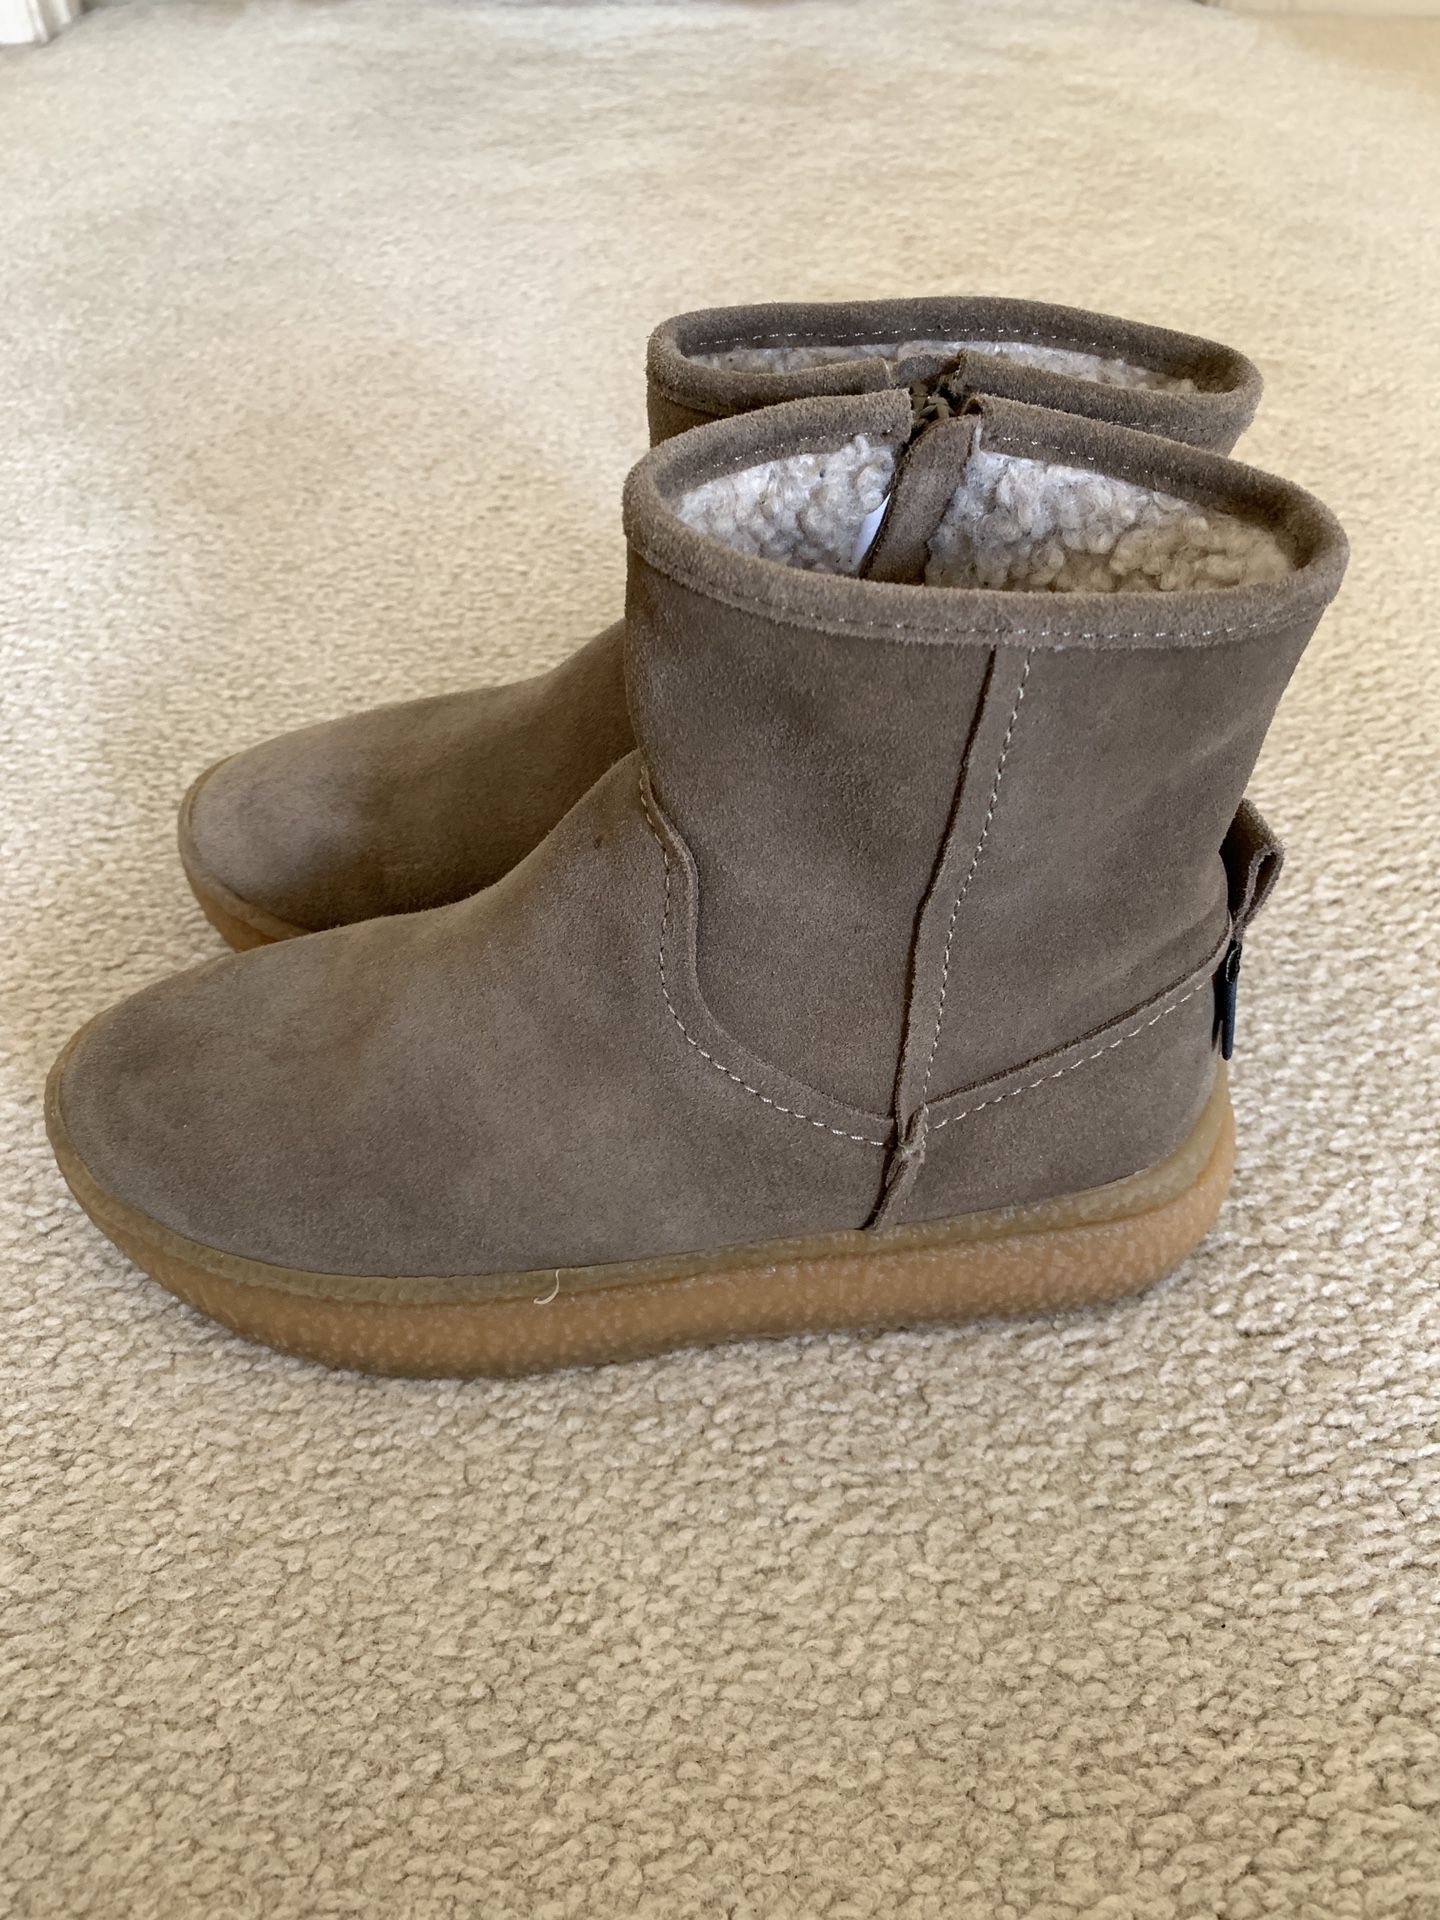 Zara Girl’s Suede Boots With Faux Fur Lining - Size 3.5